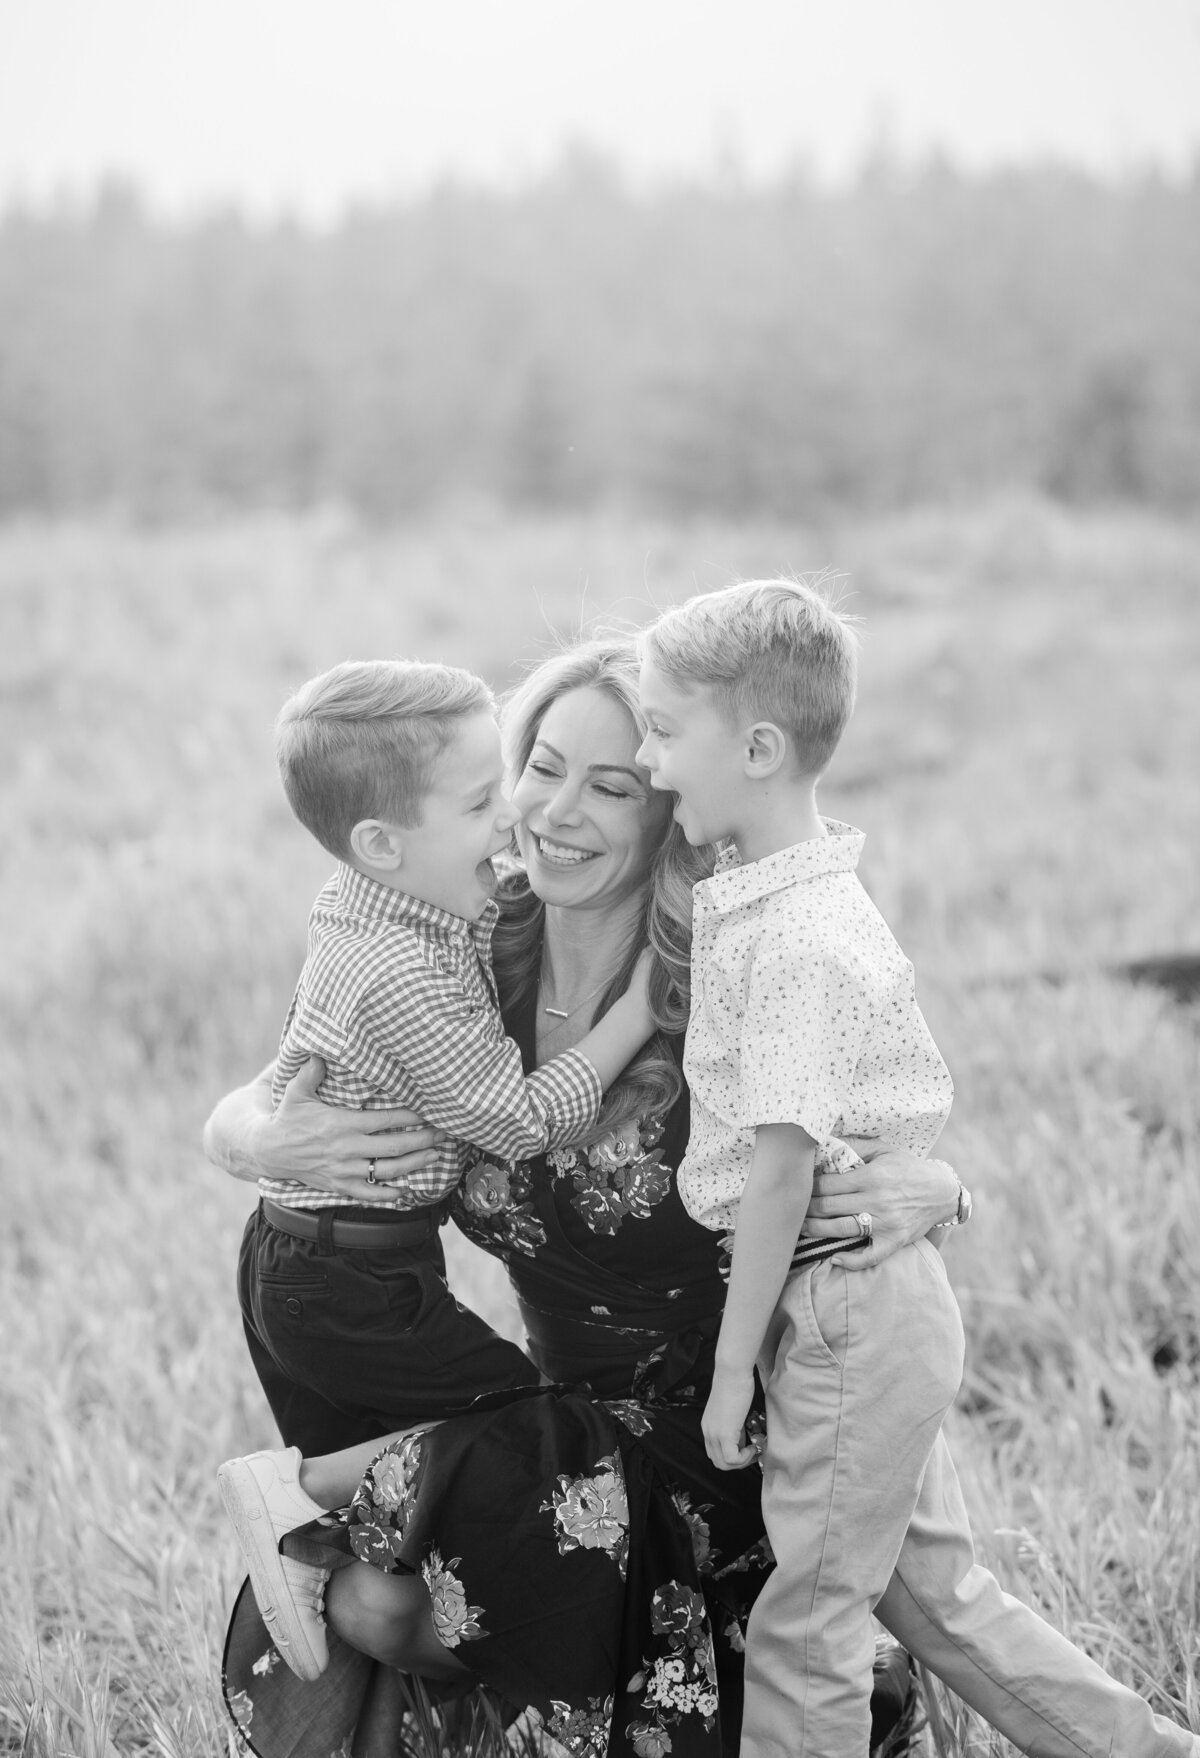 This black and white photo shows a mom kneeling down to the level of her young sons. They are all laughing and smiling with each other